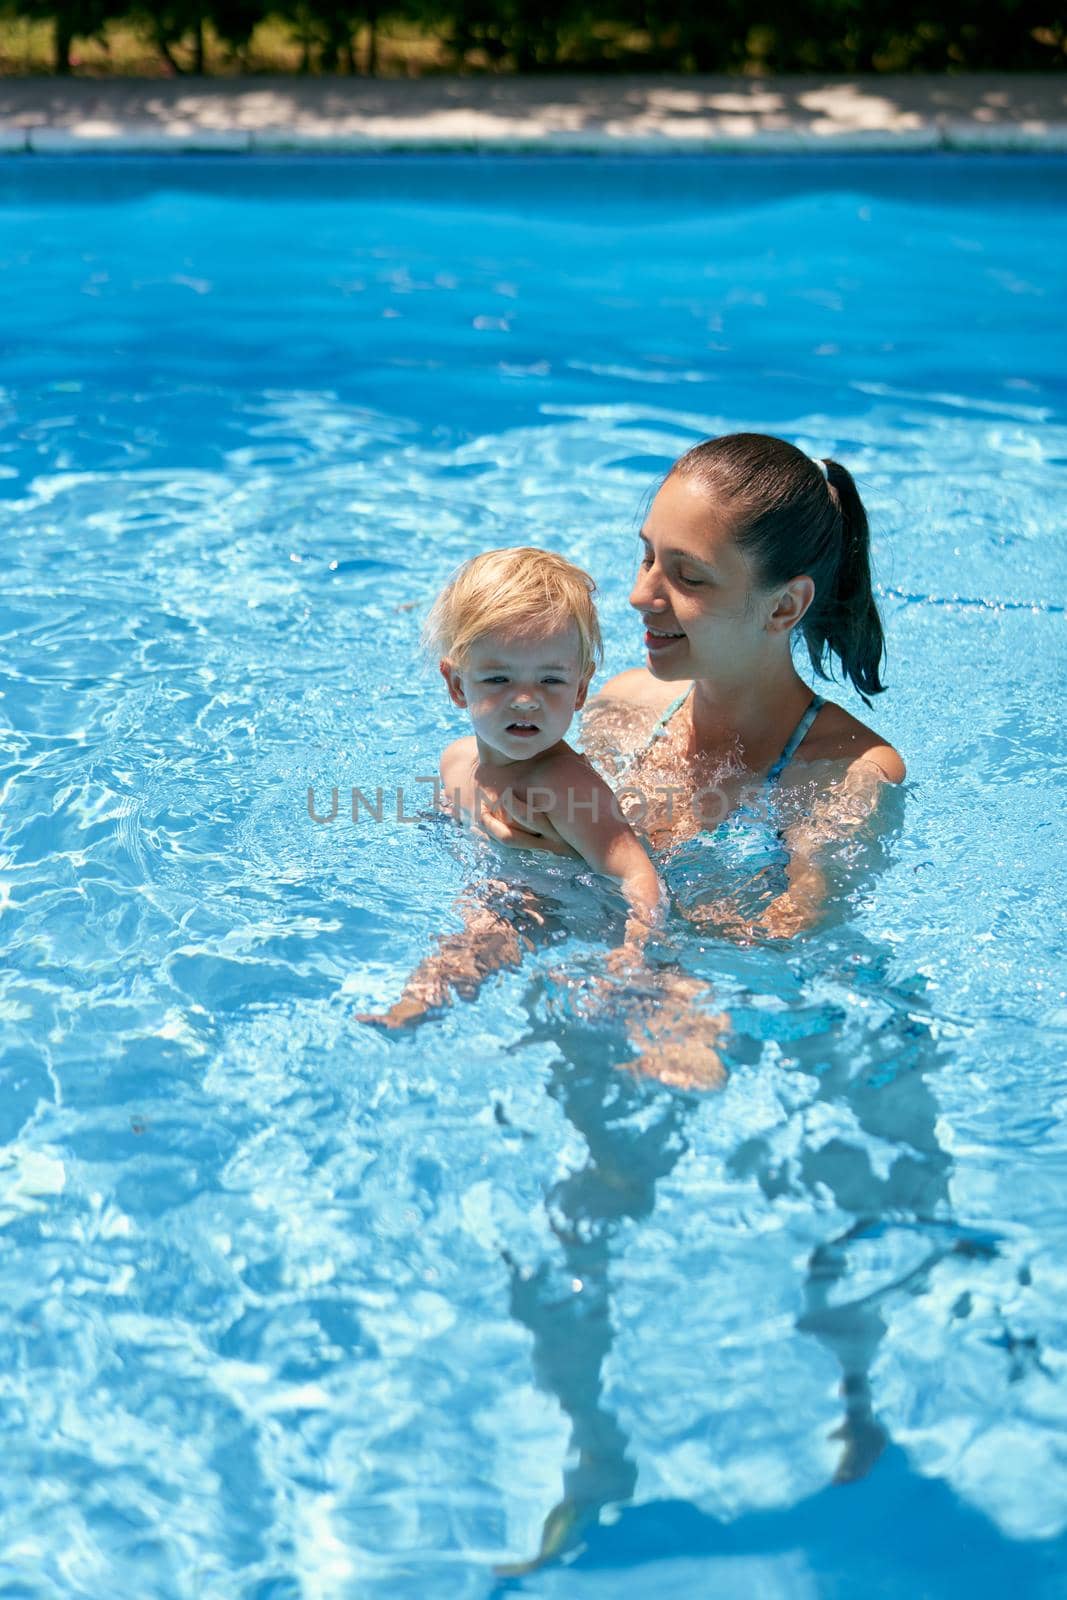 Mom with a small baby in the pool by Nadtochiy